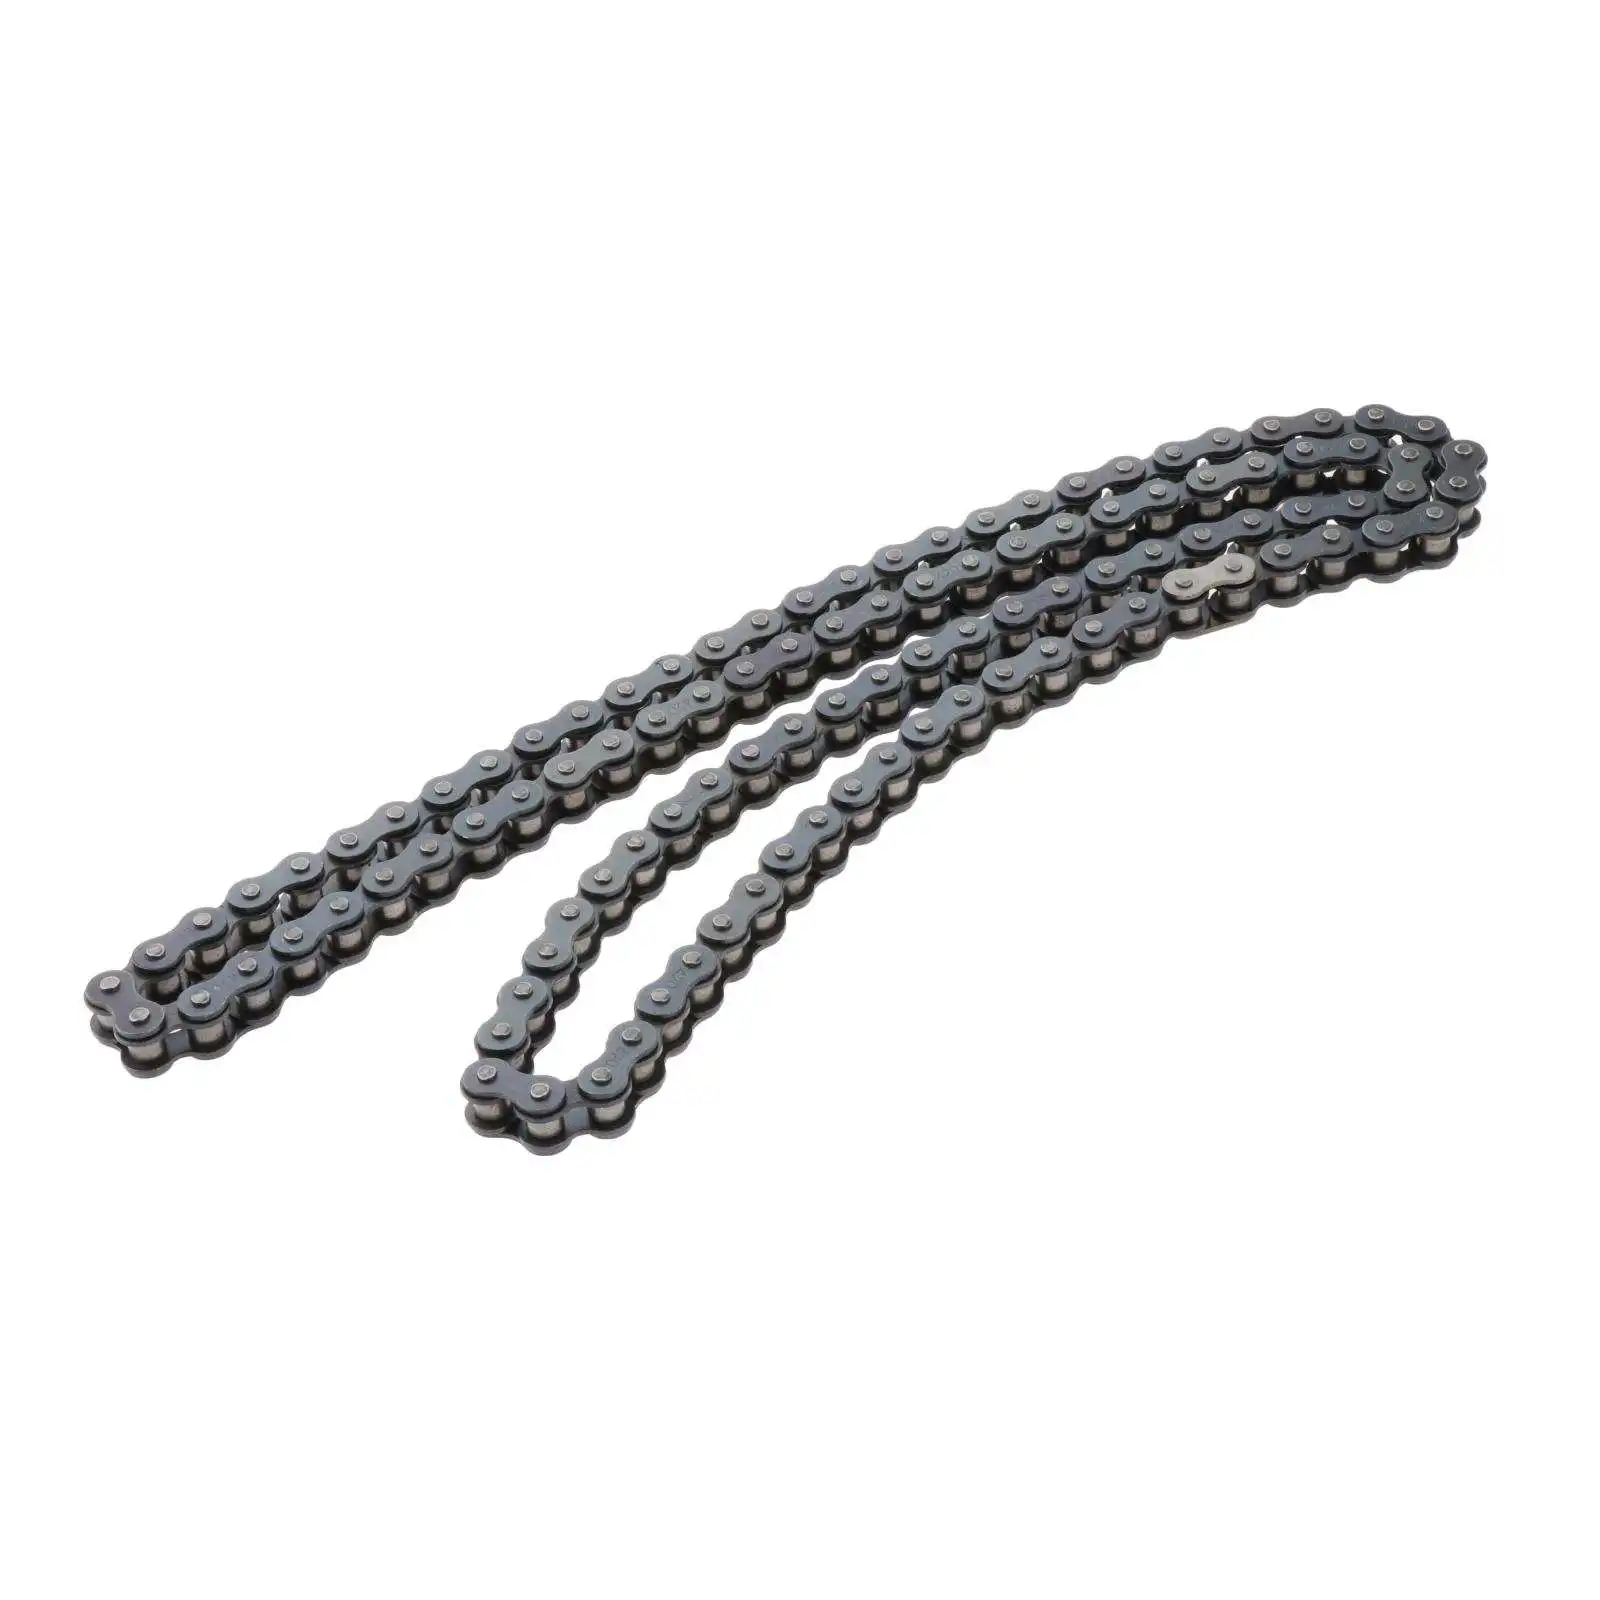 Steel 420 Motorcycle Chain 50-110Cc Roller 420 Standard Roller Chain for ATV Quad Scooter Go Kart Motorcycle Dirt Pit Bike